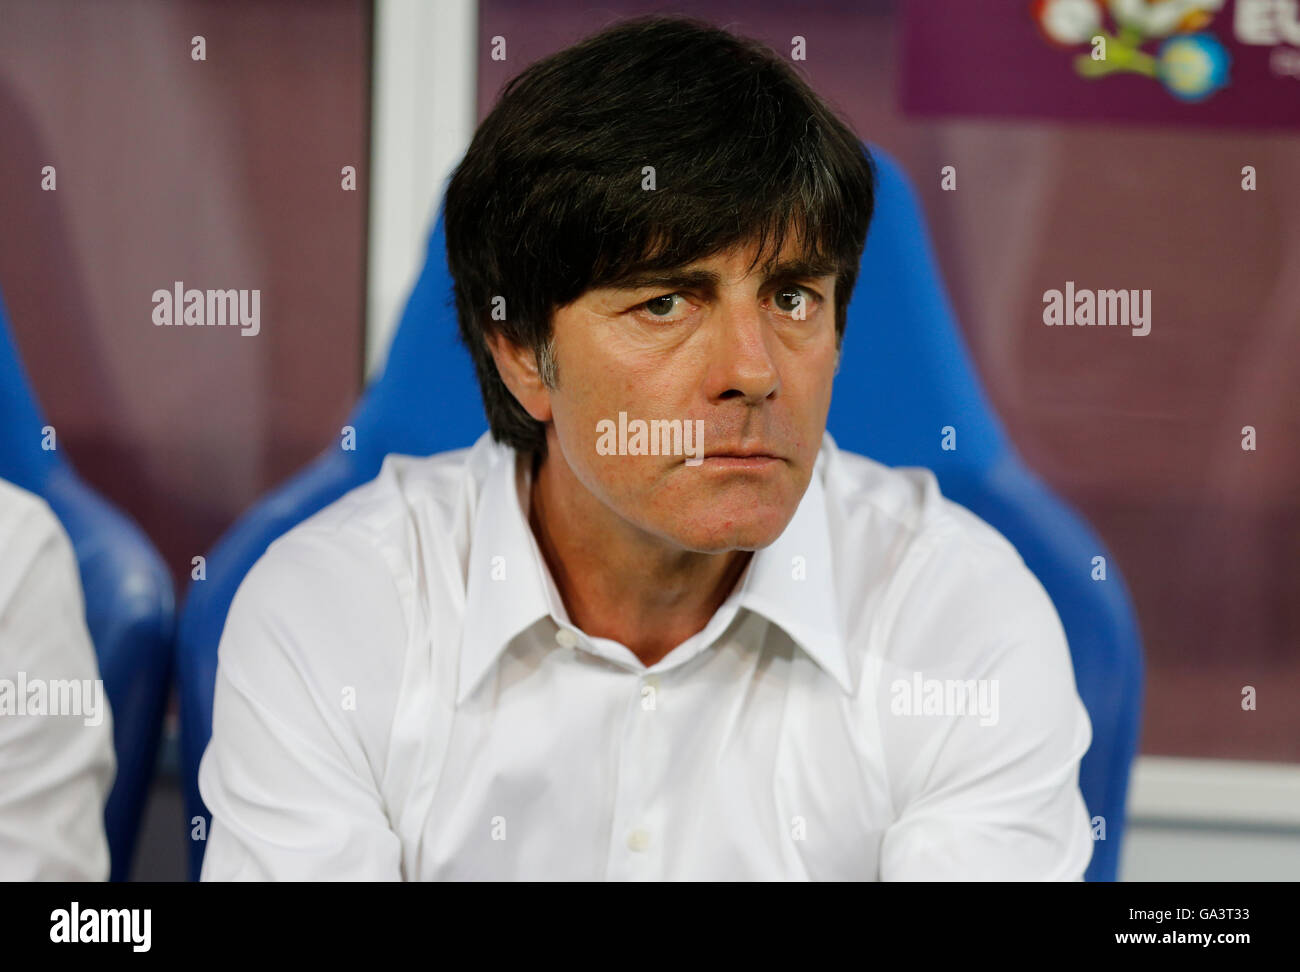 Head coach of Germany national football team Joachim Low looks on during UEFA EURO 2012 game against Denmark at Lviv Arena Stock Photo